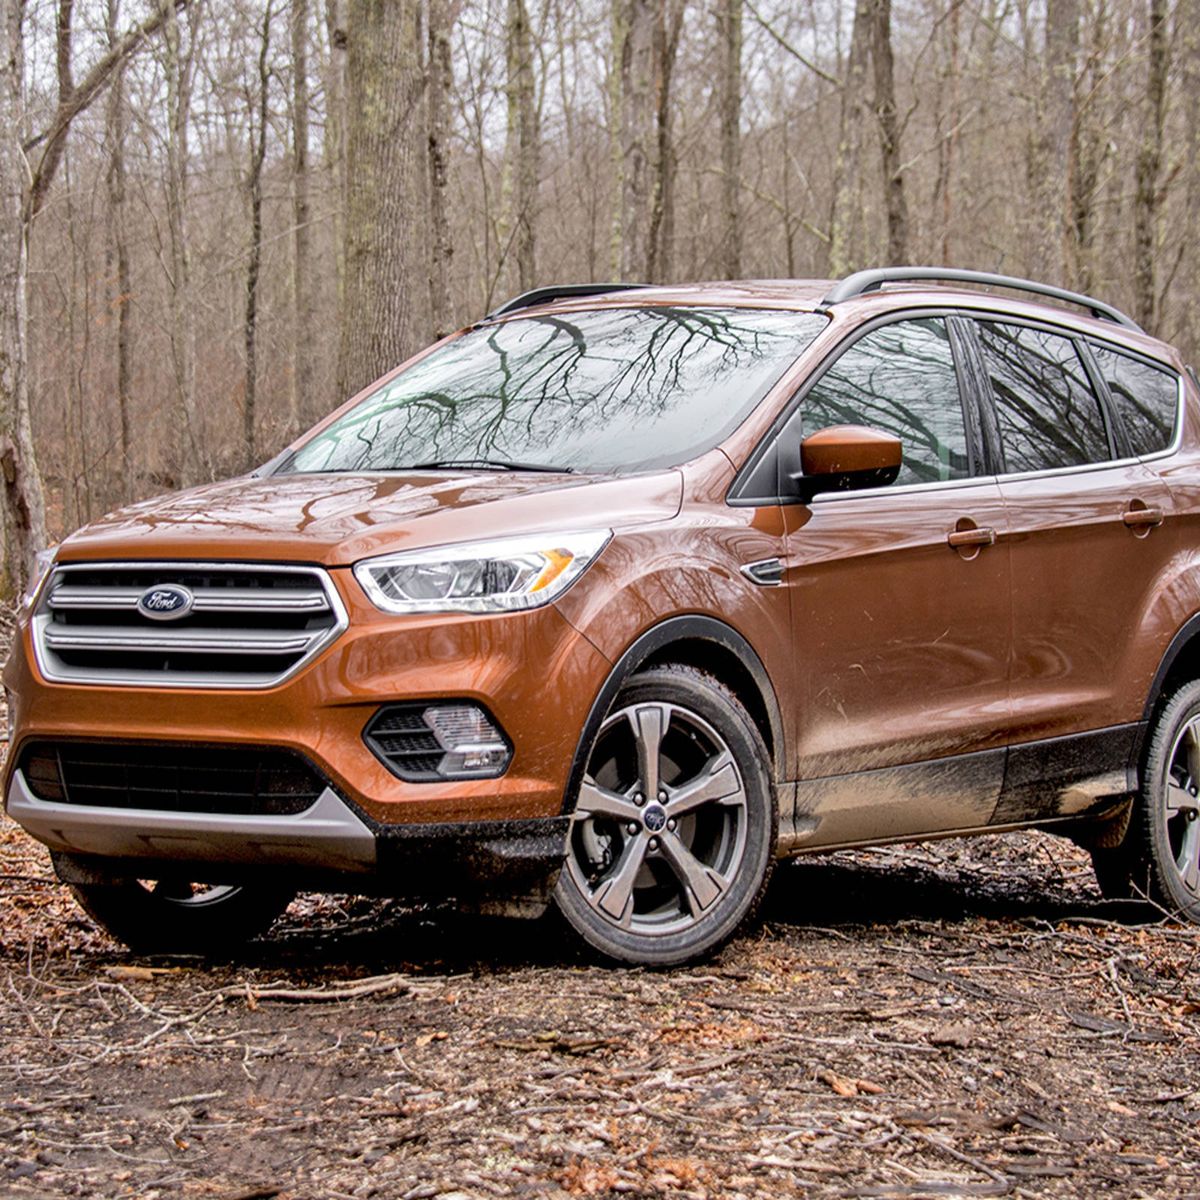 2017 Ford Escape SE review: Capable crossover